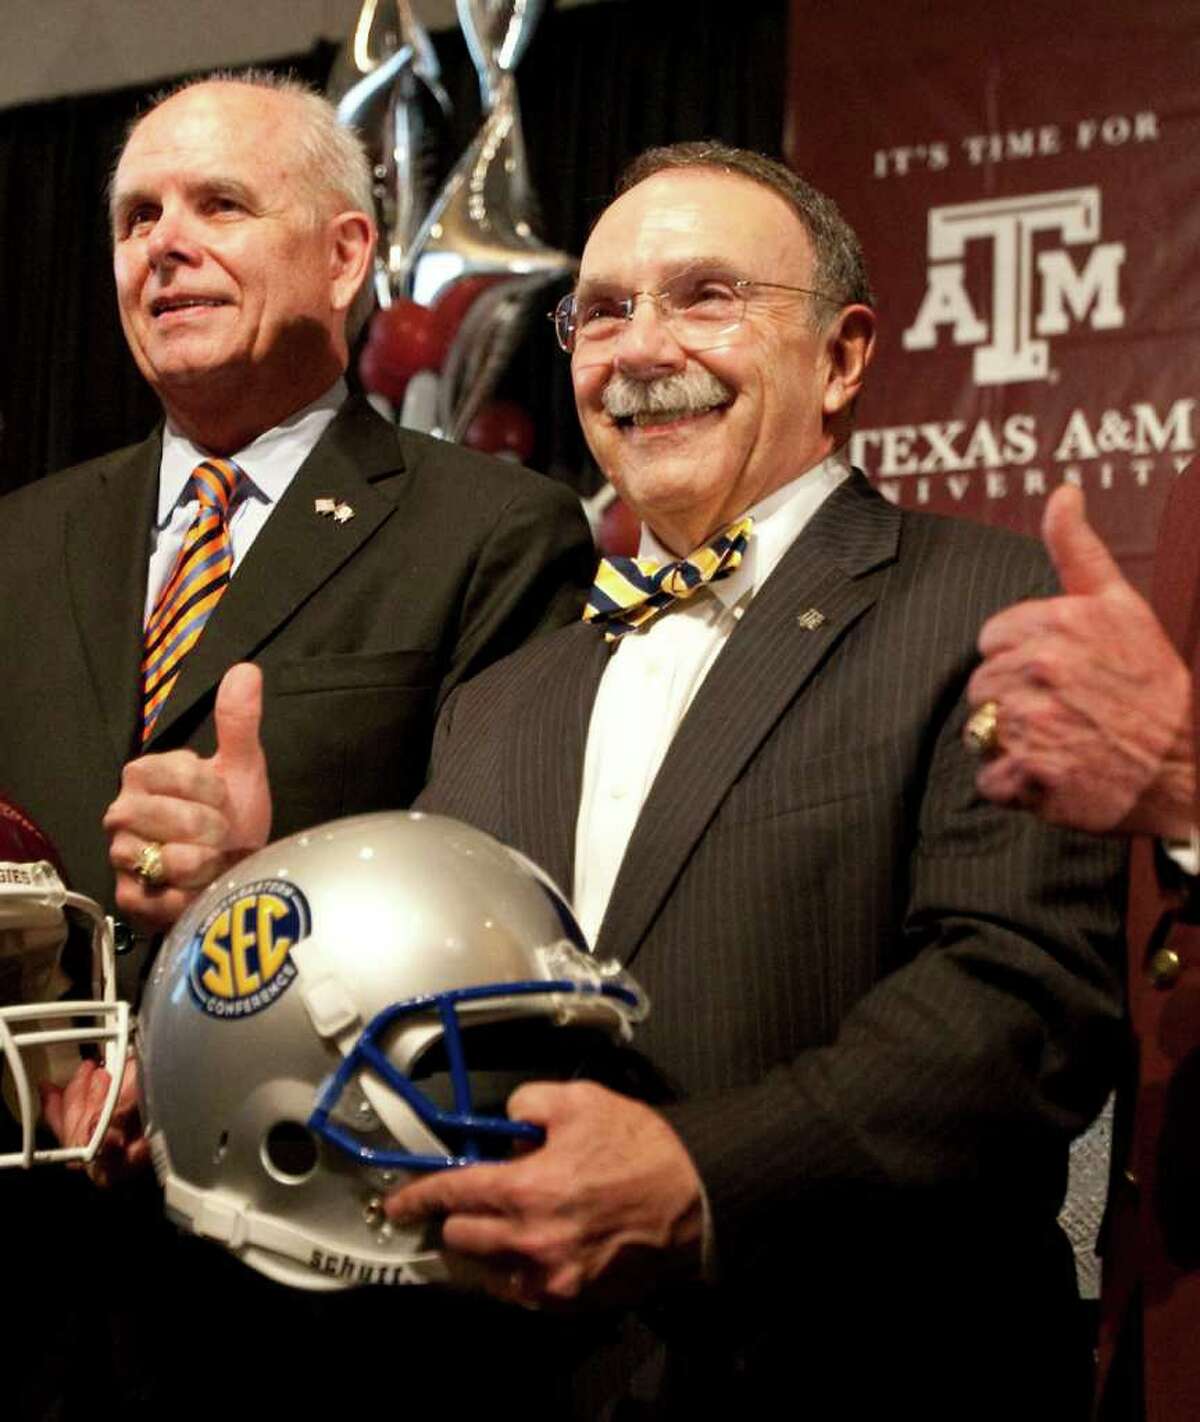 The University of Florida president Bernie Machen, who is also the chairman of SEC leaders, center, and Texas A&M president R. Bowen Loftin pose for a picture as Texas A&M officially enters the SEC, Monday, Sept. 26, 2011, in Kyle Field in College Station.